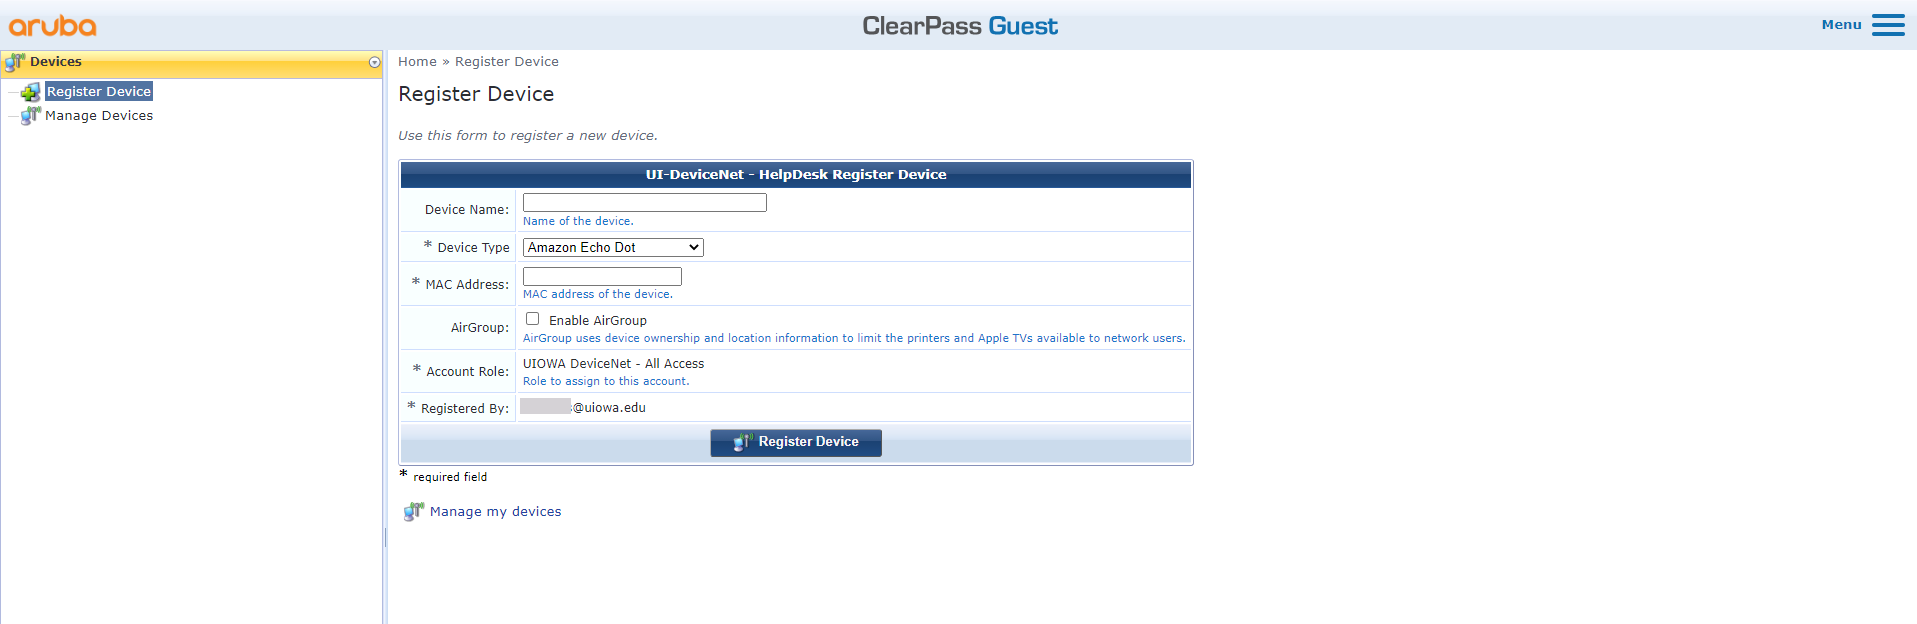 Image shows Device Registration Page